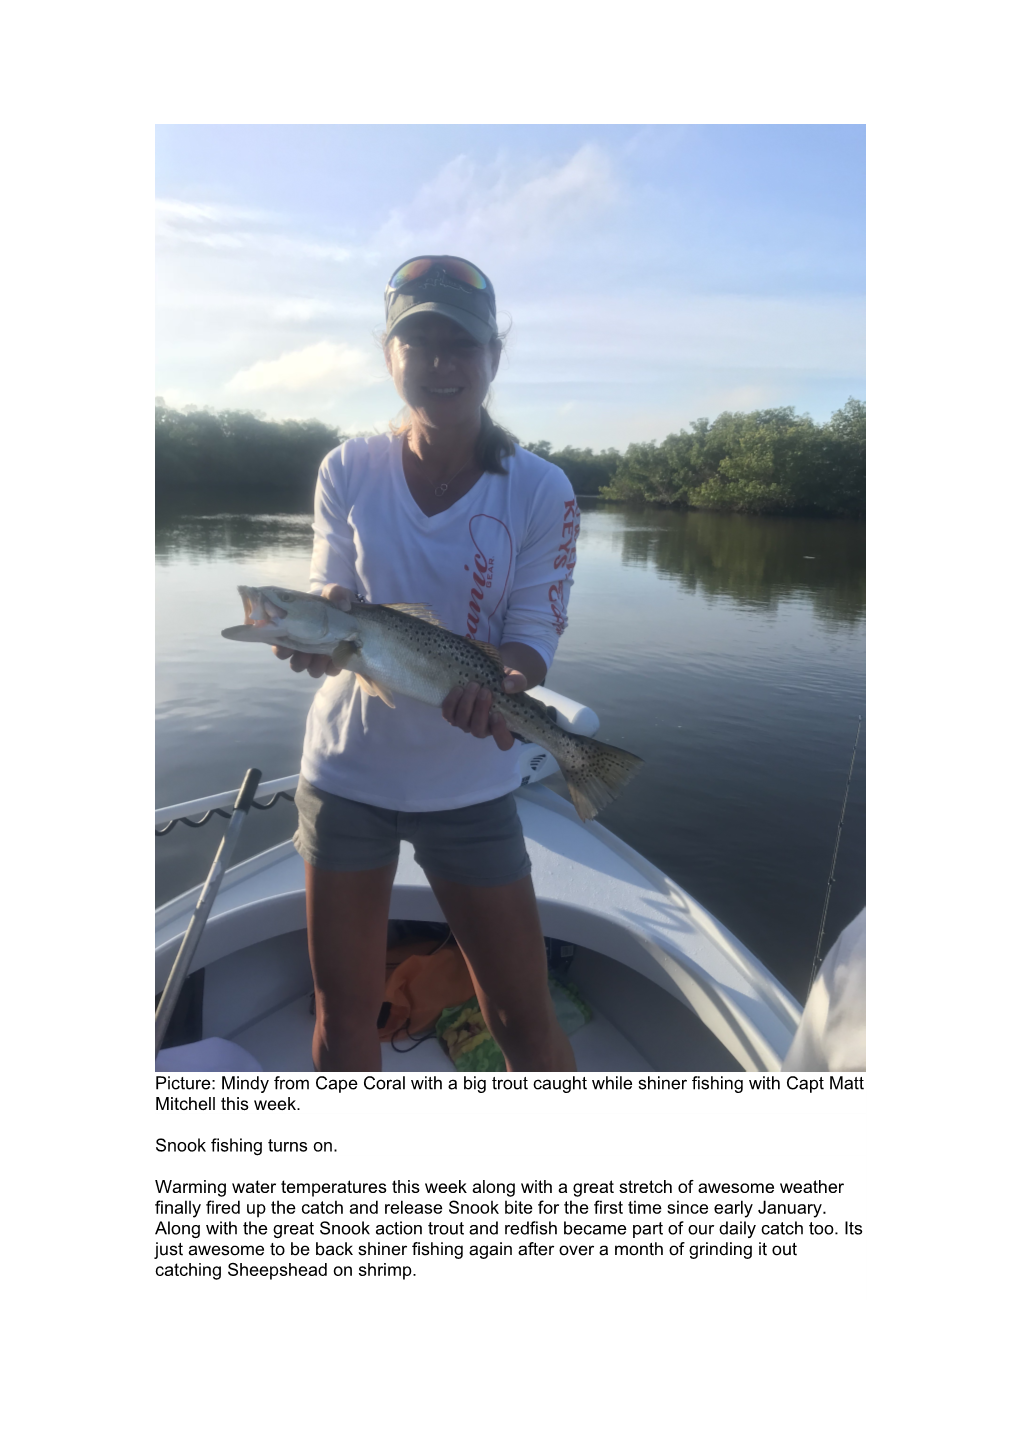 Picture: Mindy from Cape Coral with a Big Trout Caught While Shiner Fishing with Capt Matt